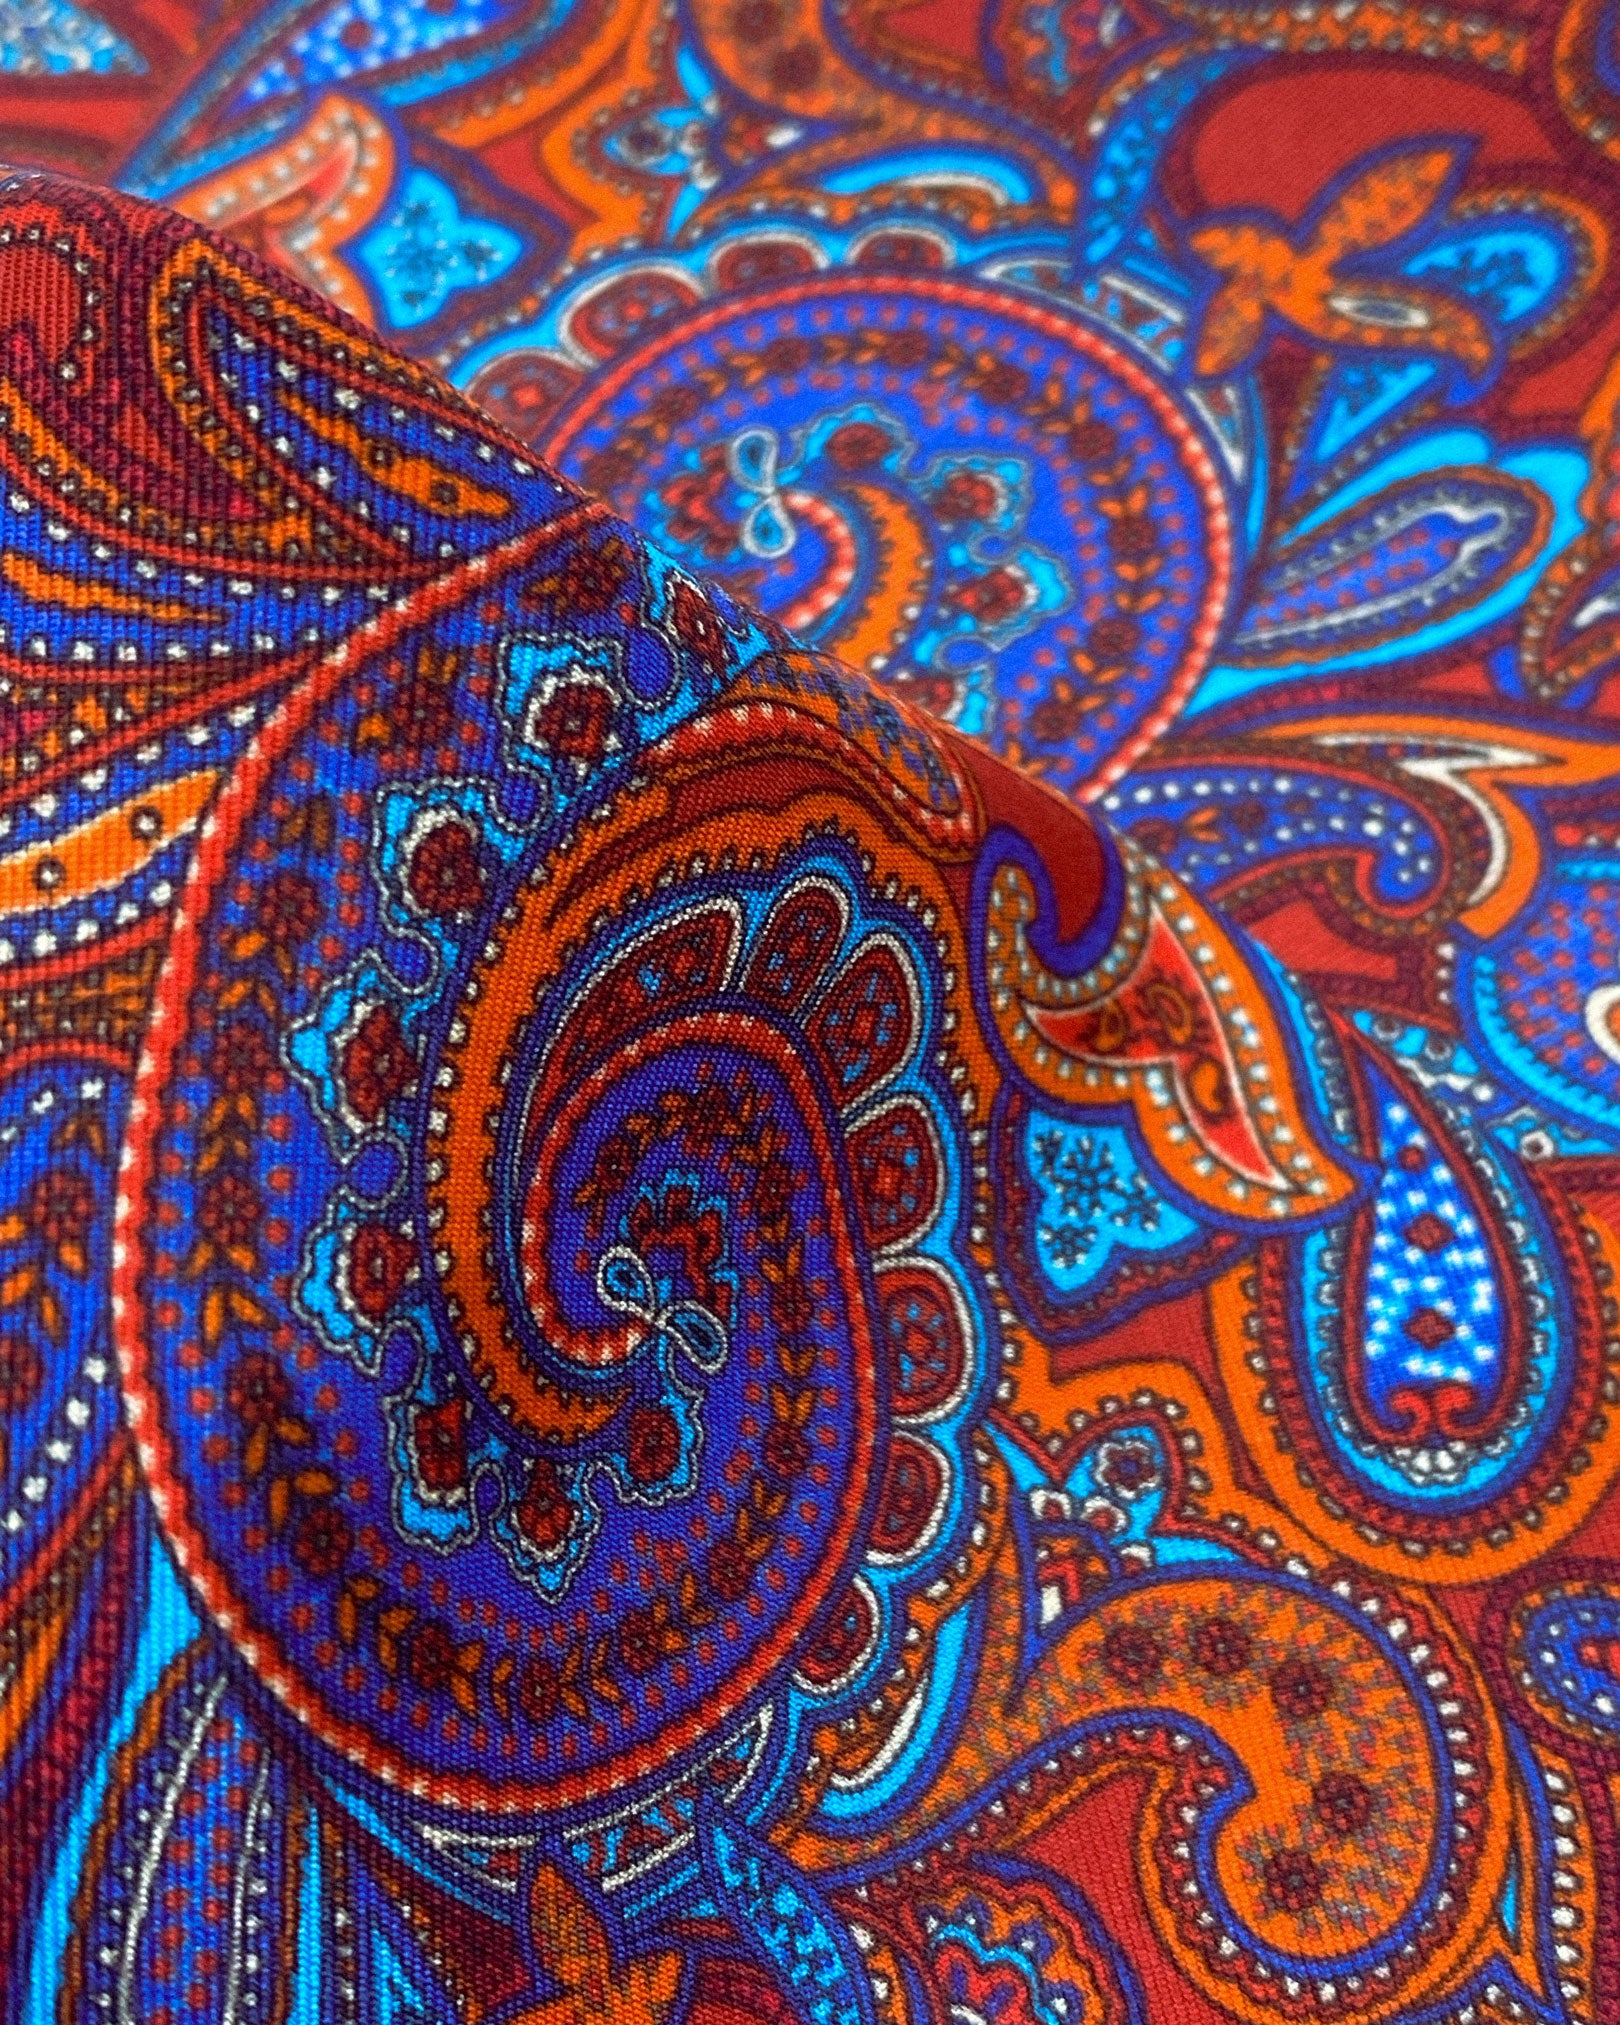 Ruffled close-up view of the Bretton silk scarf, presenting a closer view of the blue paisley patterns on a deep reddish-brown ground.